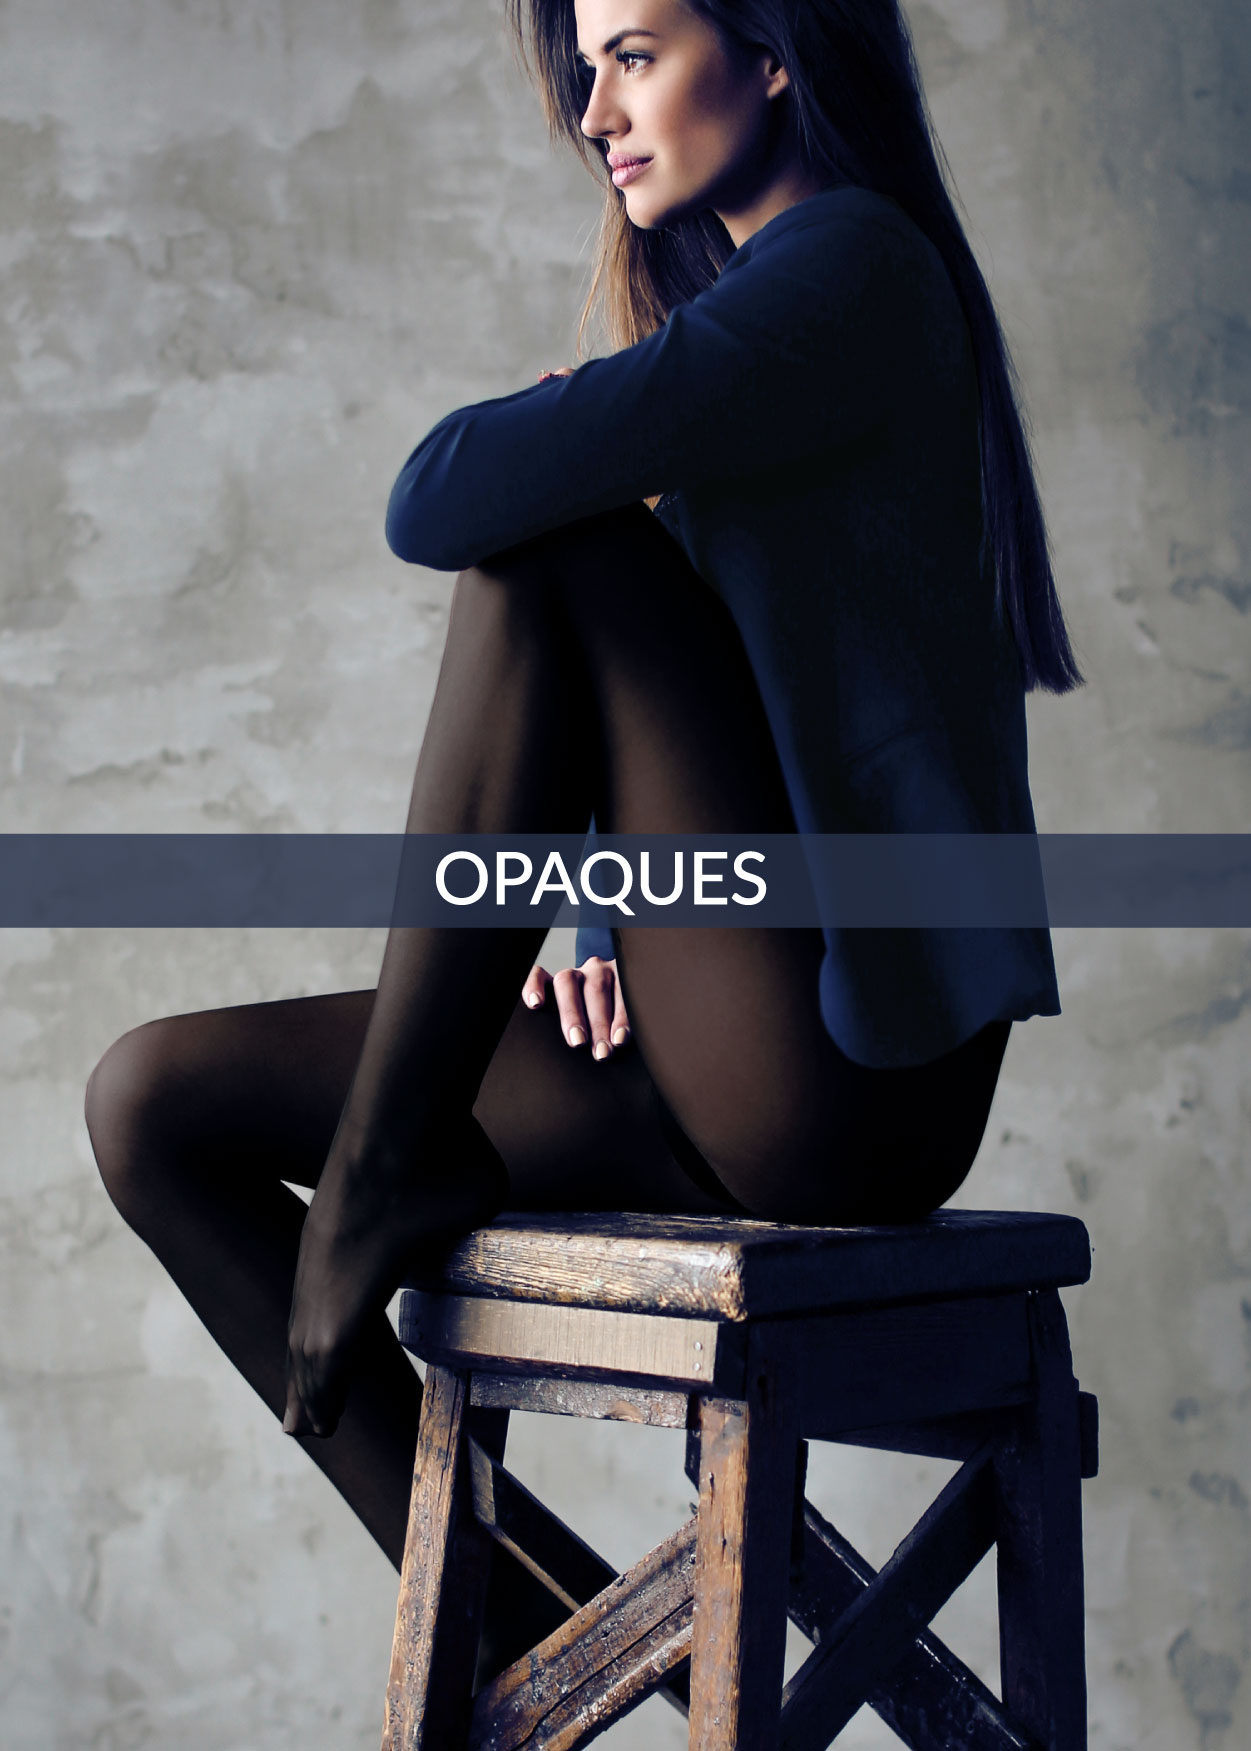 Opaques